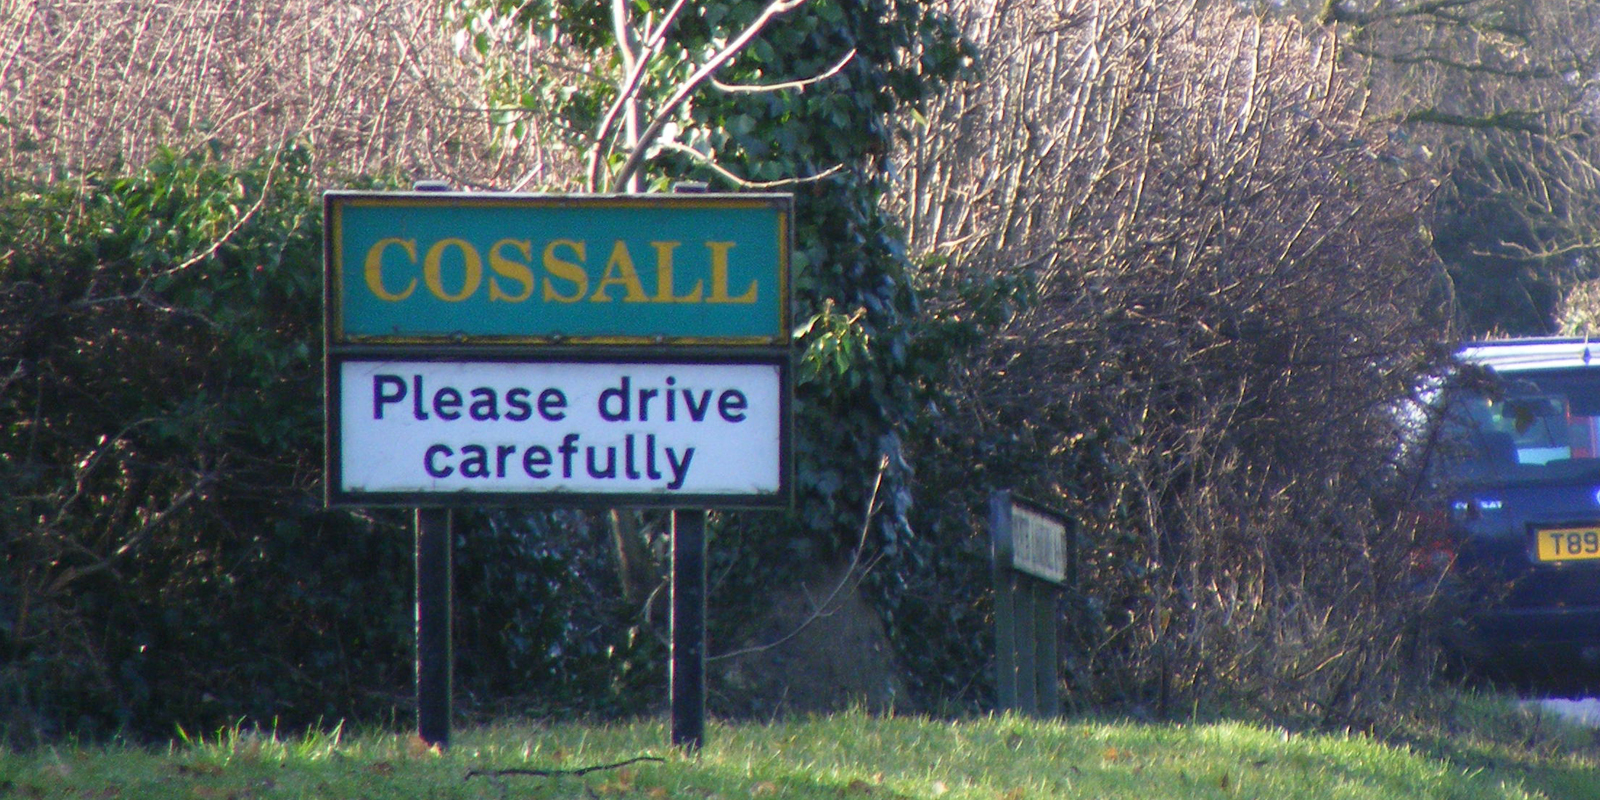 Nuisance traffic in Cossall